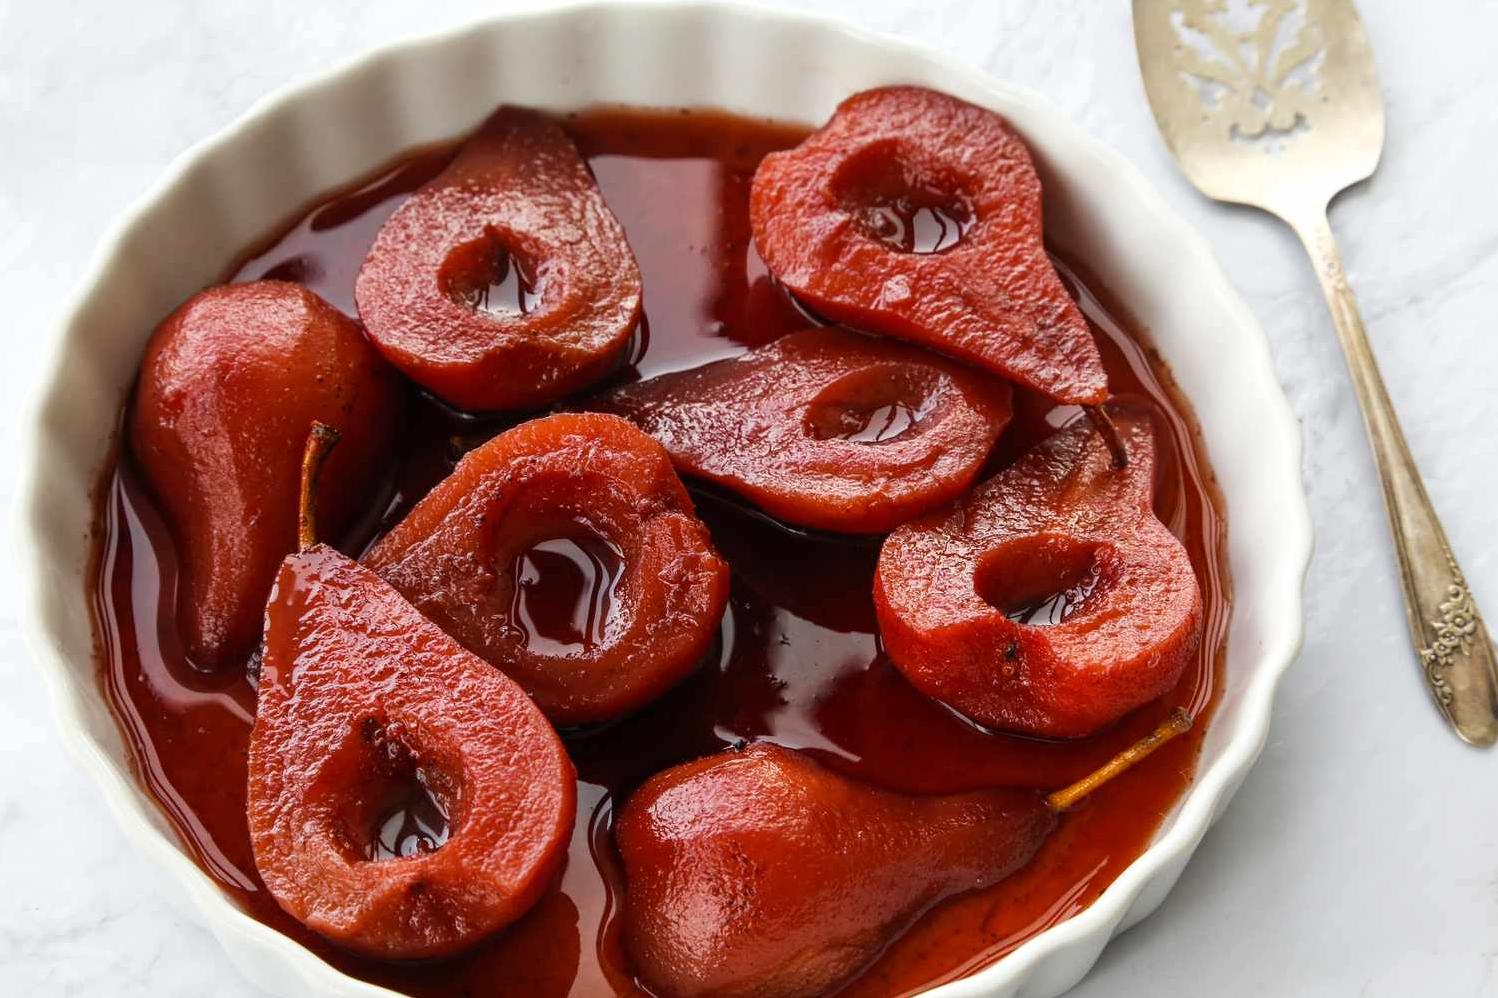  Get cozy with this warming spiced wine and pear dessert